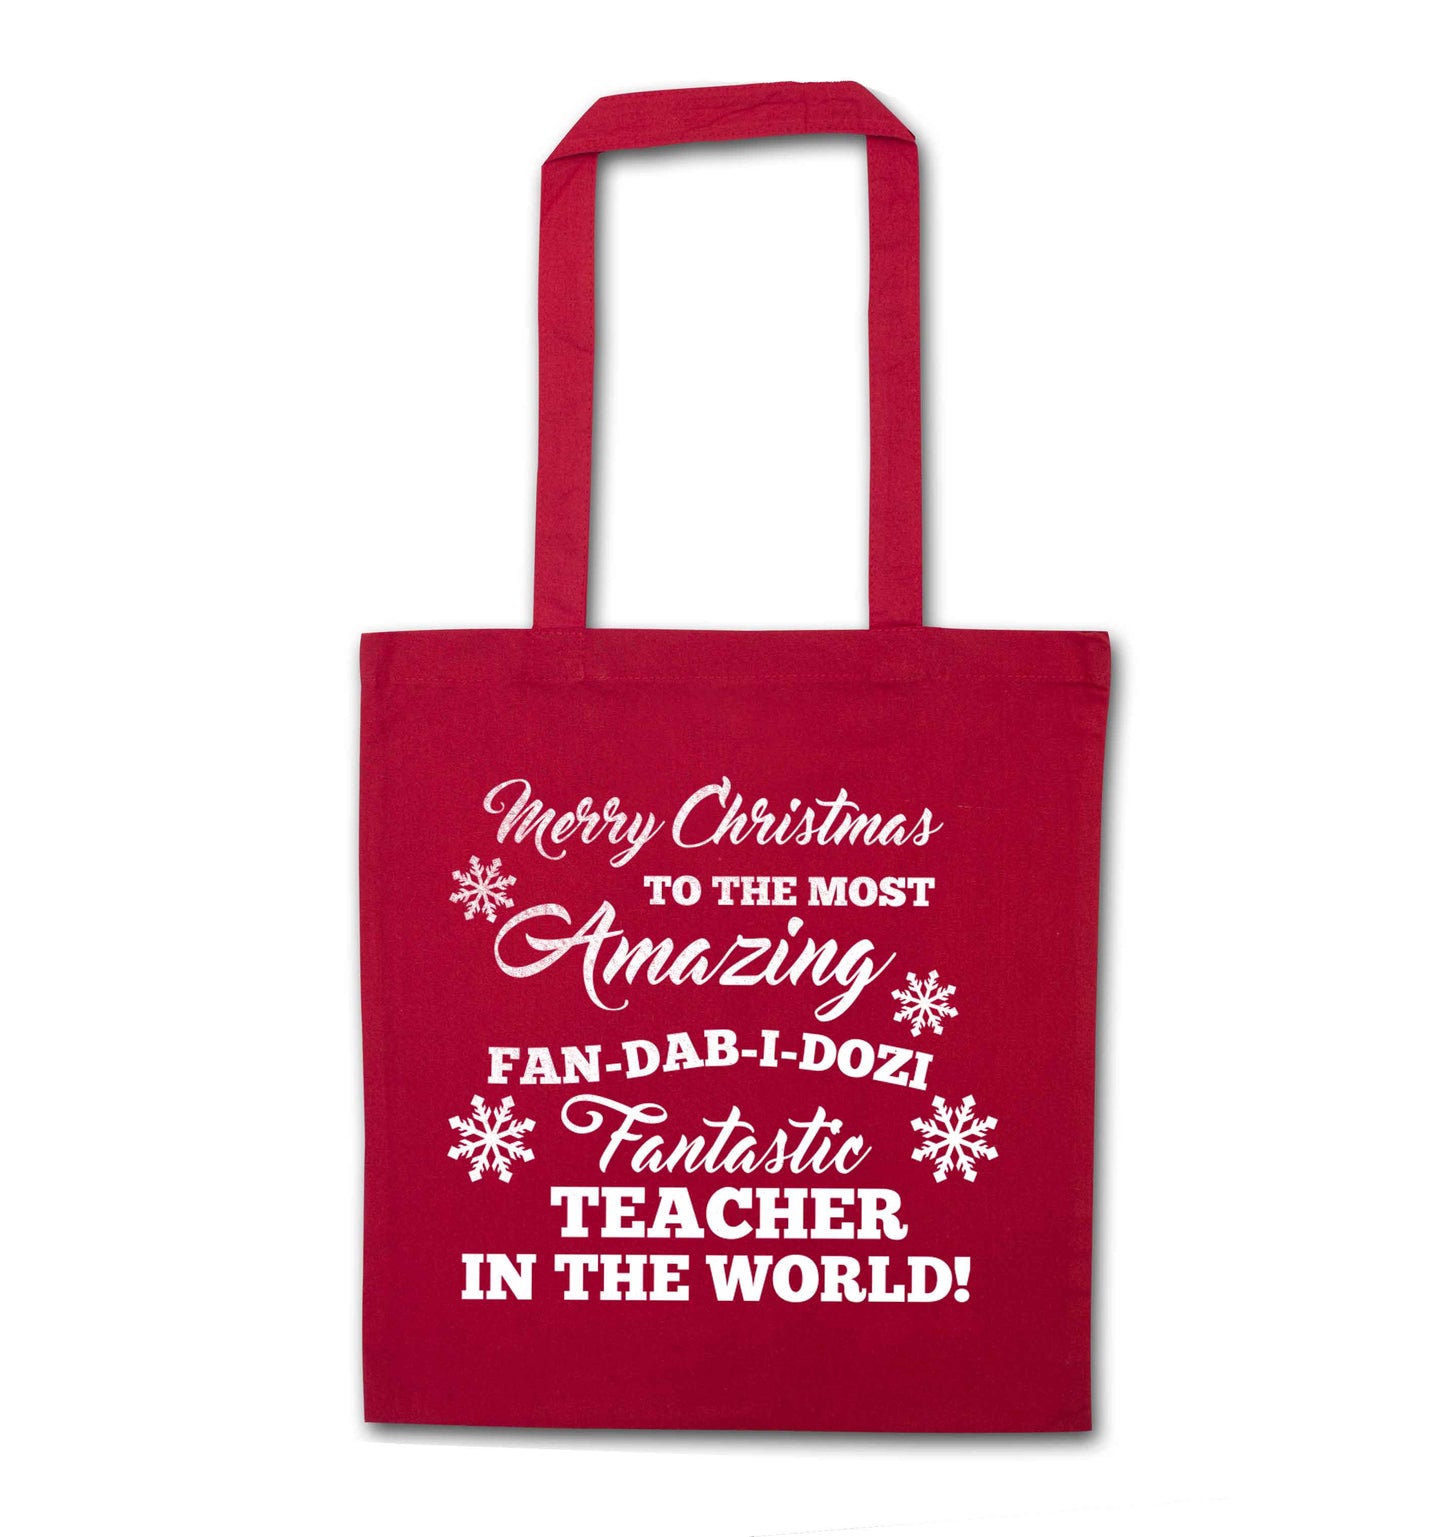 Merry Christmas to the most amazing fan-dab-i-dozi fantasic teacher in the world red tote bag